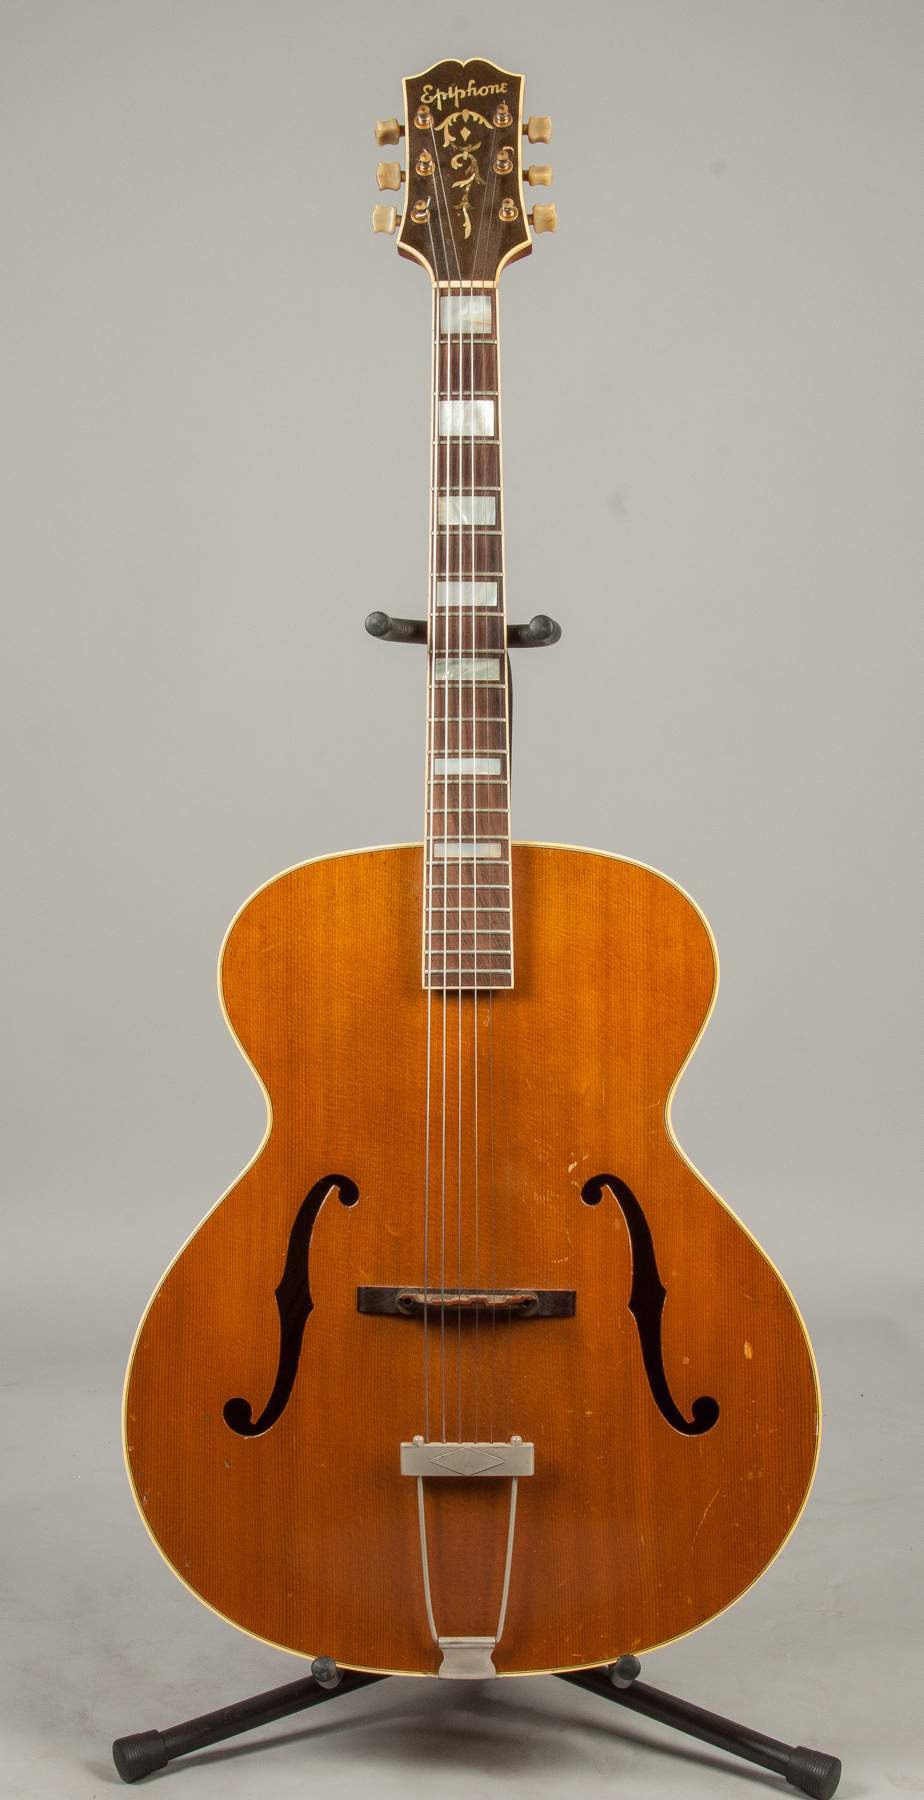 Epiphone 1945 Natural Blonde Broadway Guitar | Cottone Auctions